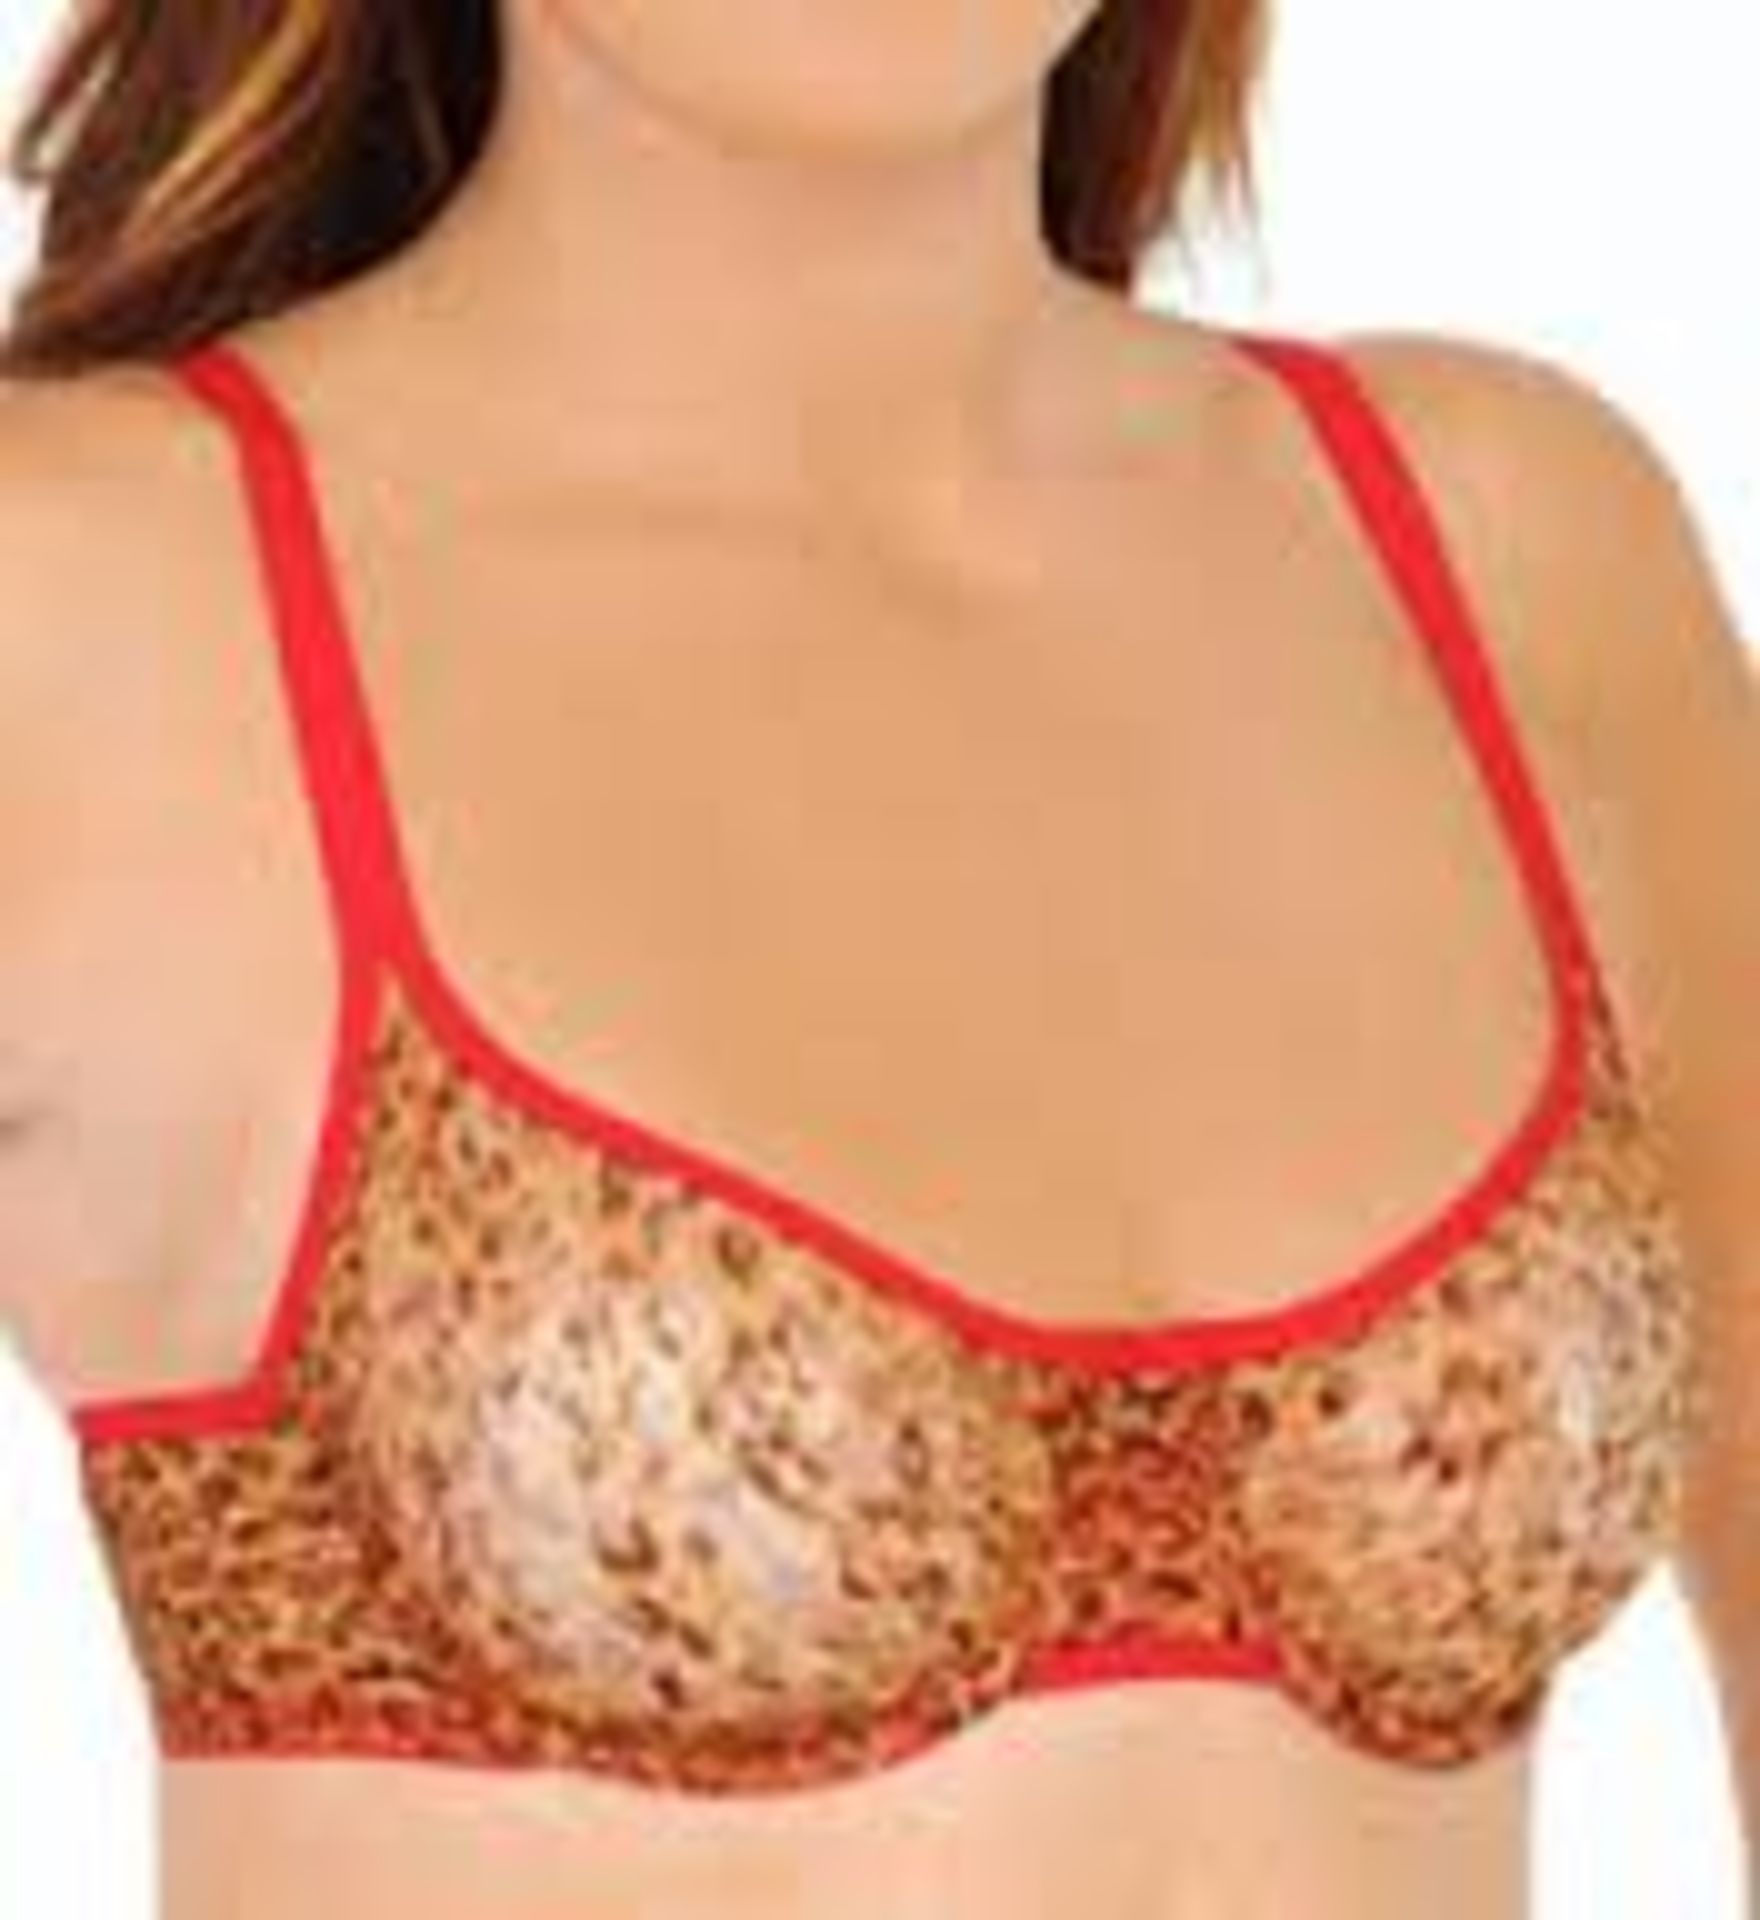 V Brand New A Lot of Four DKNY 451000 Signature Lace Underwire Demi Bras Size 36B ISP $38 Each (